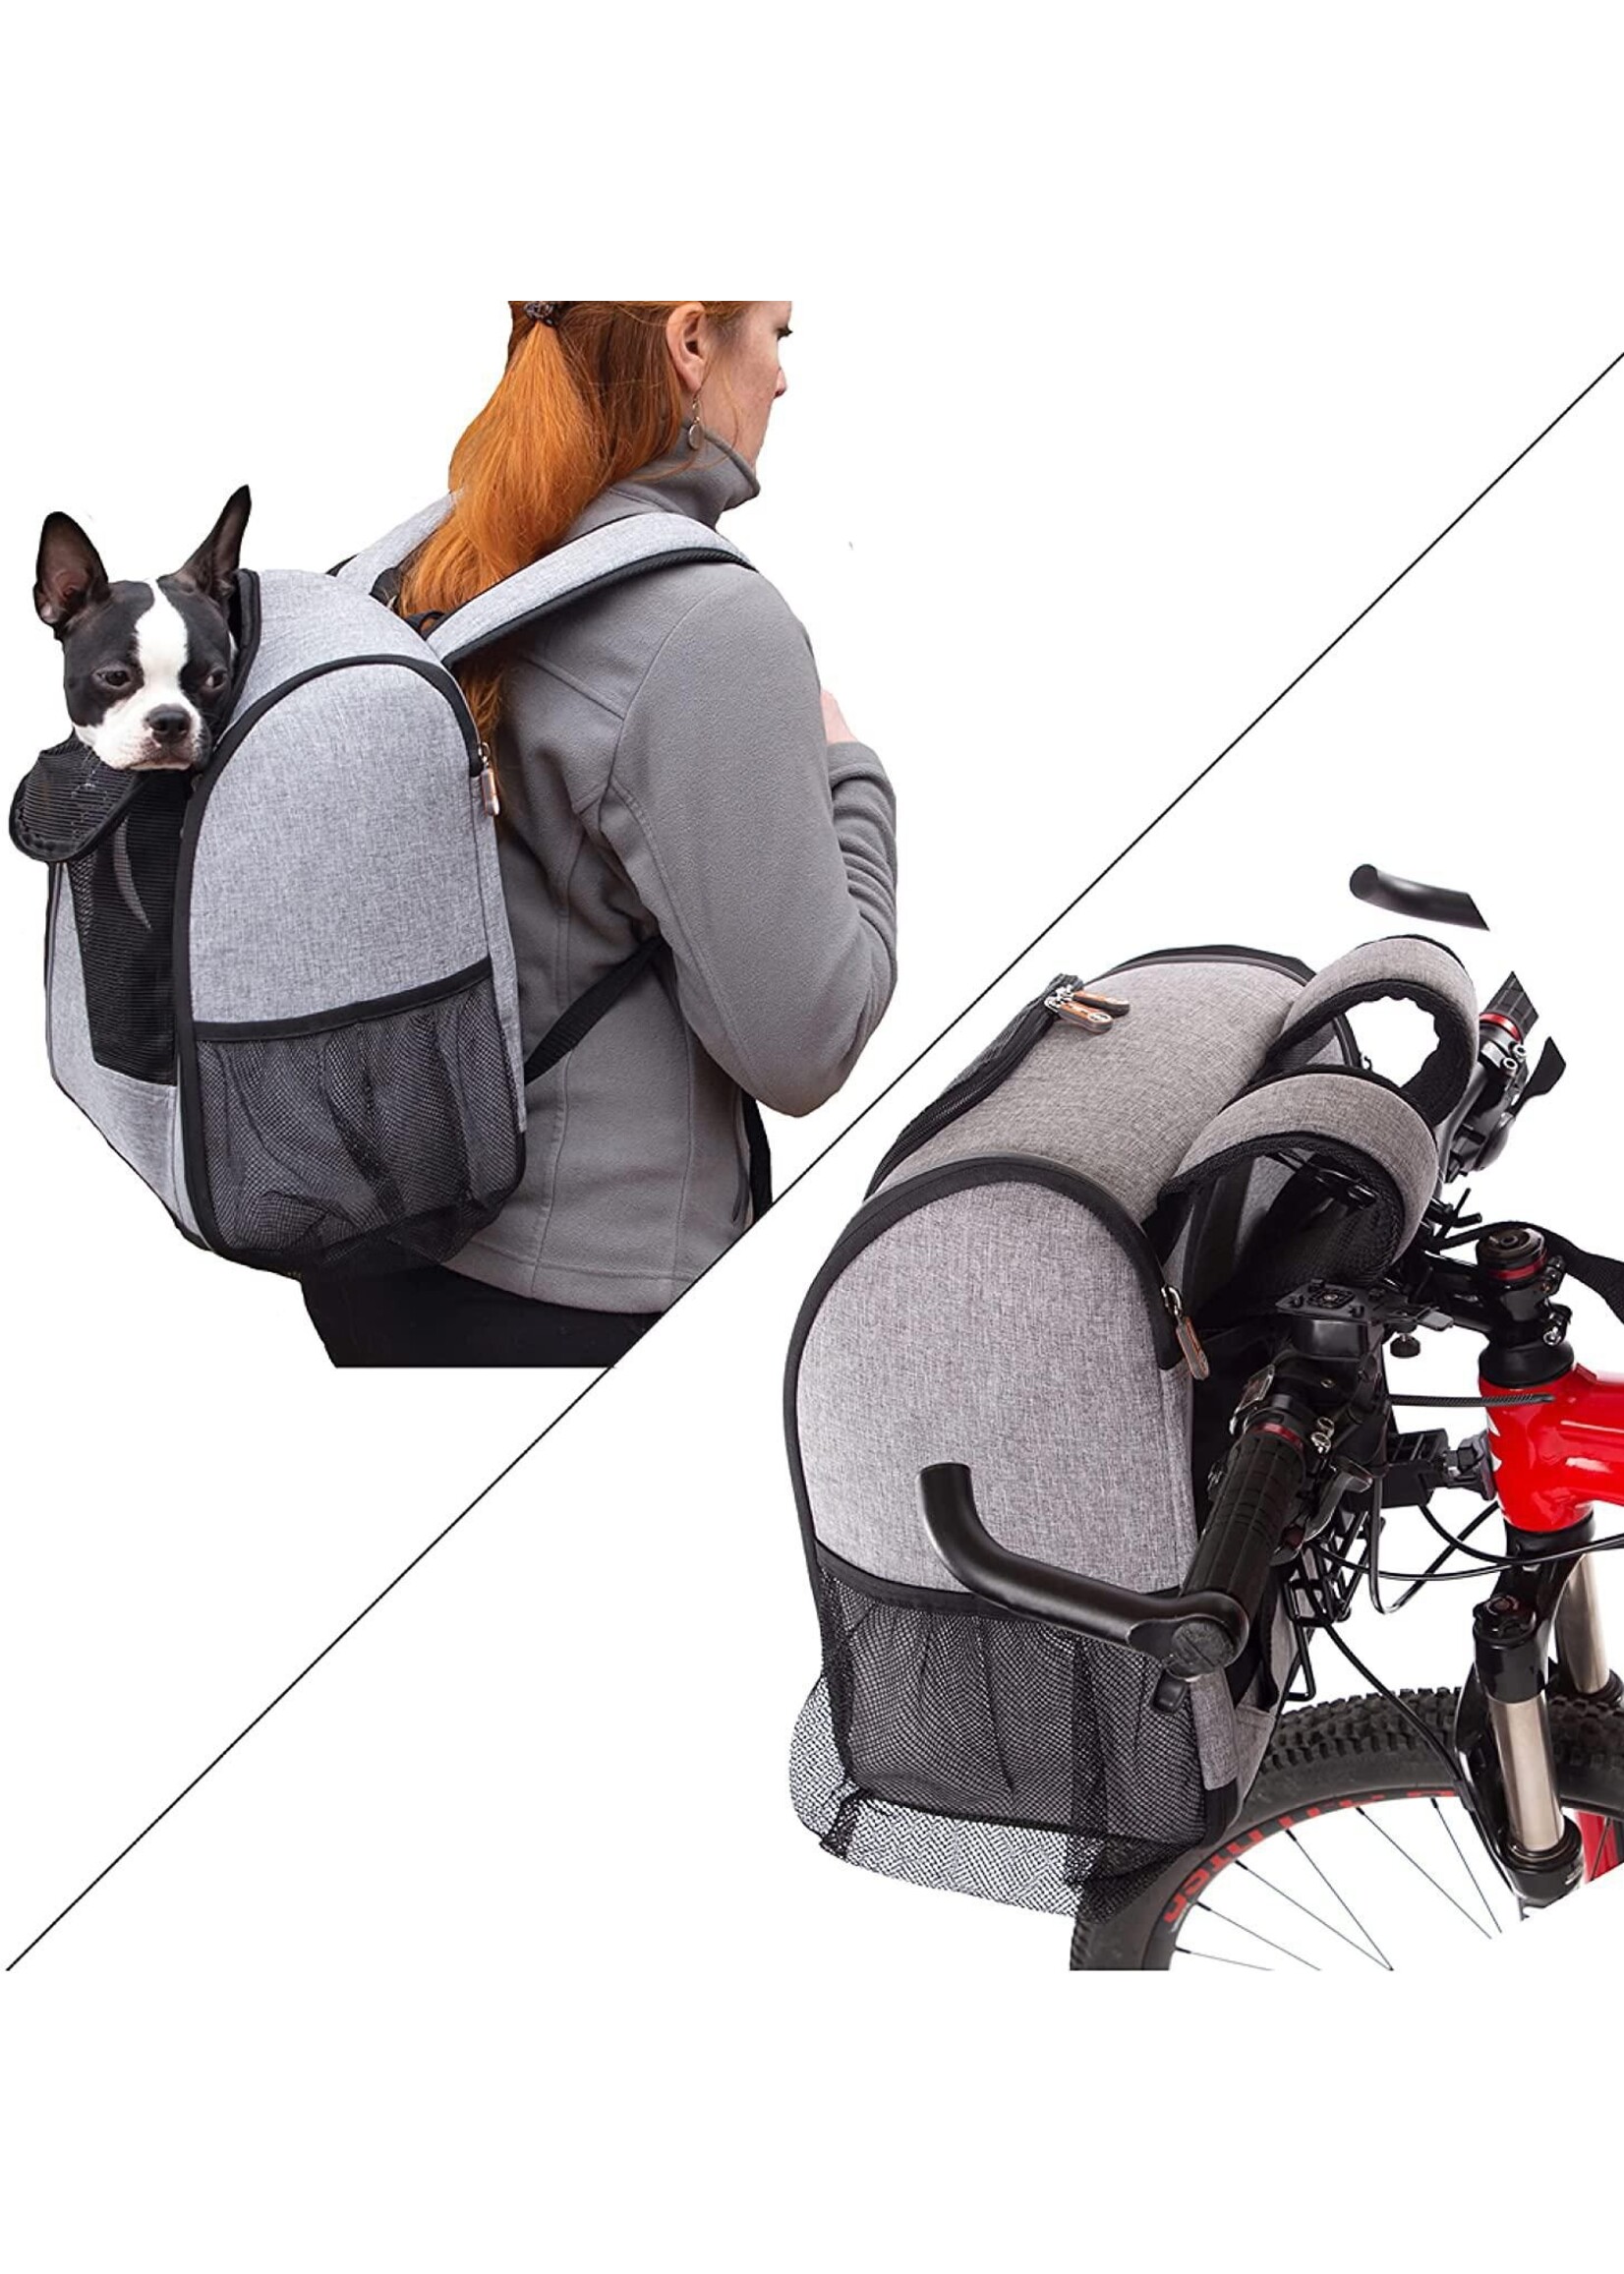 K&H Pet Products K&H Travel Bike Backpack Gray 9.5 x 14 x 15.75in